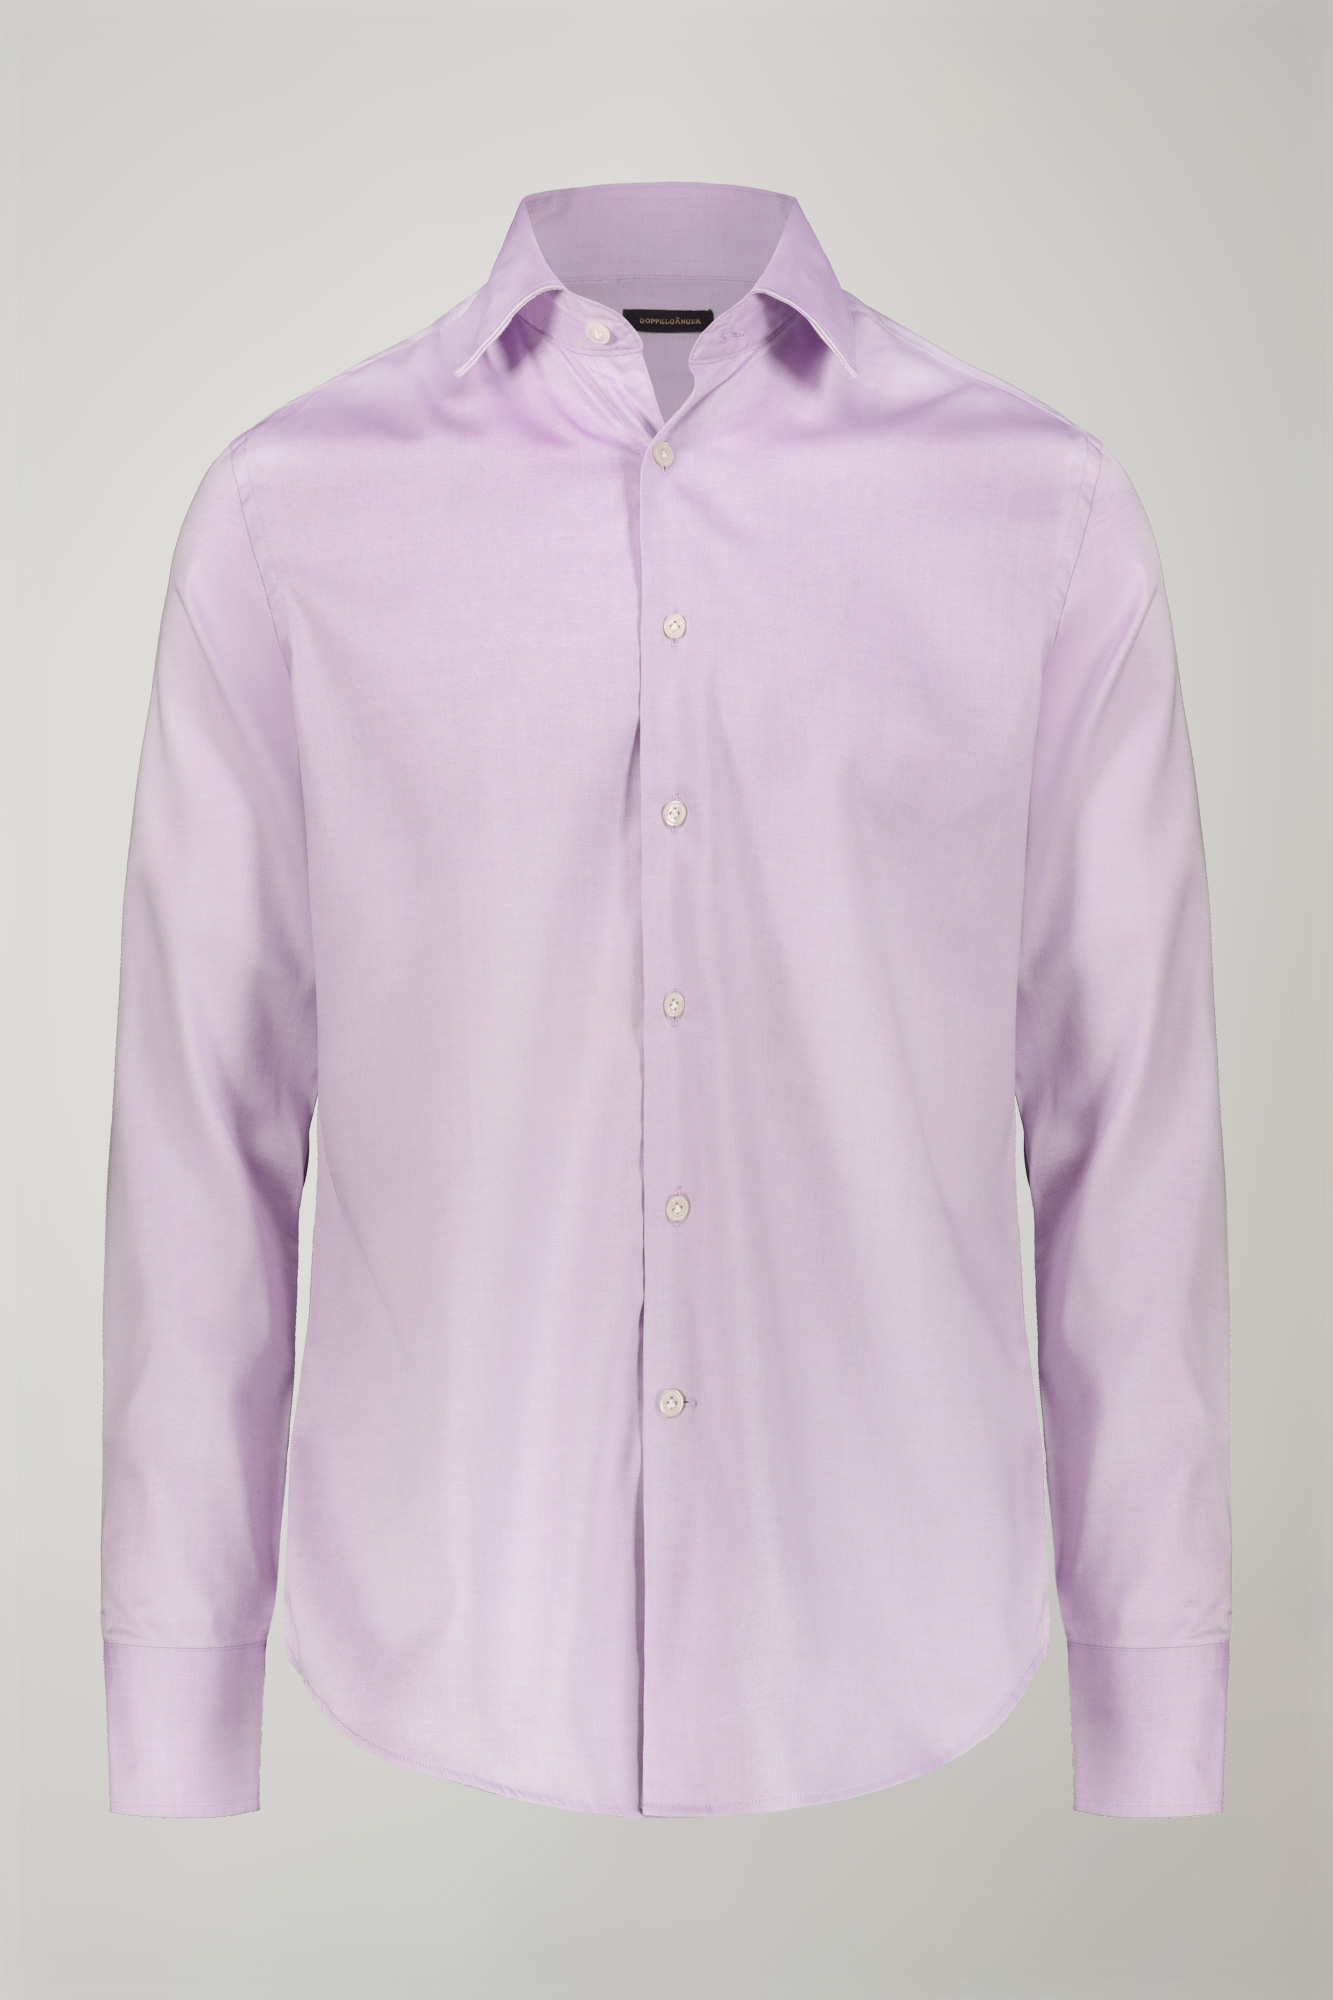 Men's shirt with classic collar 100% cotton oxford fabric regular fit image number null